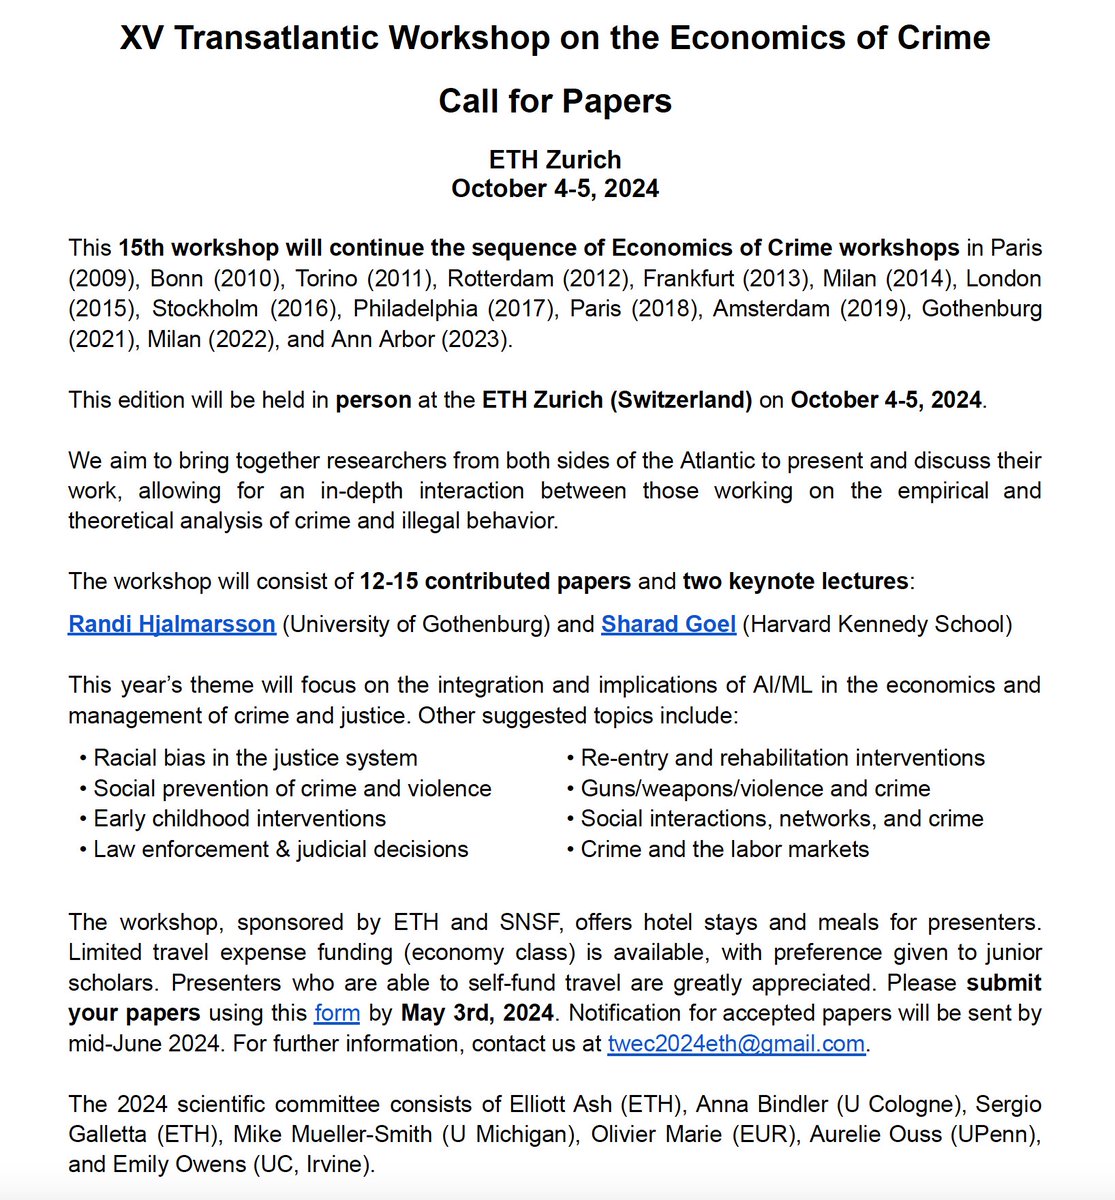 ✨Call for papers✨ This year's Transatlantic Workshop on the Economics of Crime will be held at @ETH Zurich, Oct 4-5. This is one of the top conferences for empirical research on crime & CJ policy -- and a very fun crowd. Submit your paper by May 3! docs.google.com/forms/d/e/1FAI…